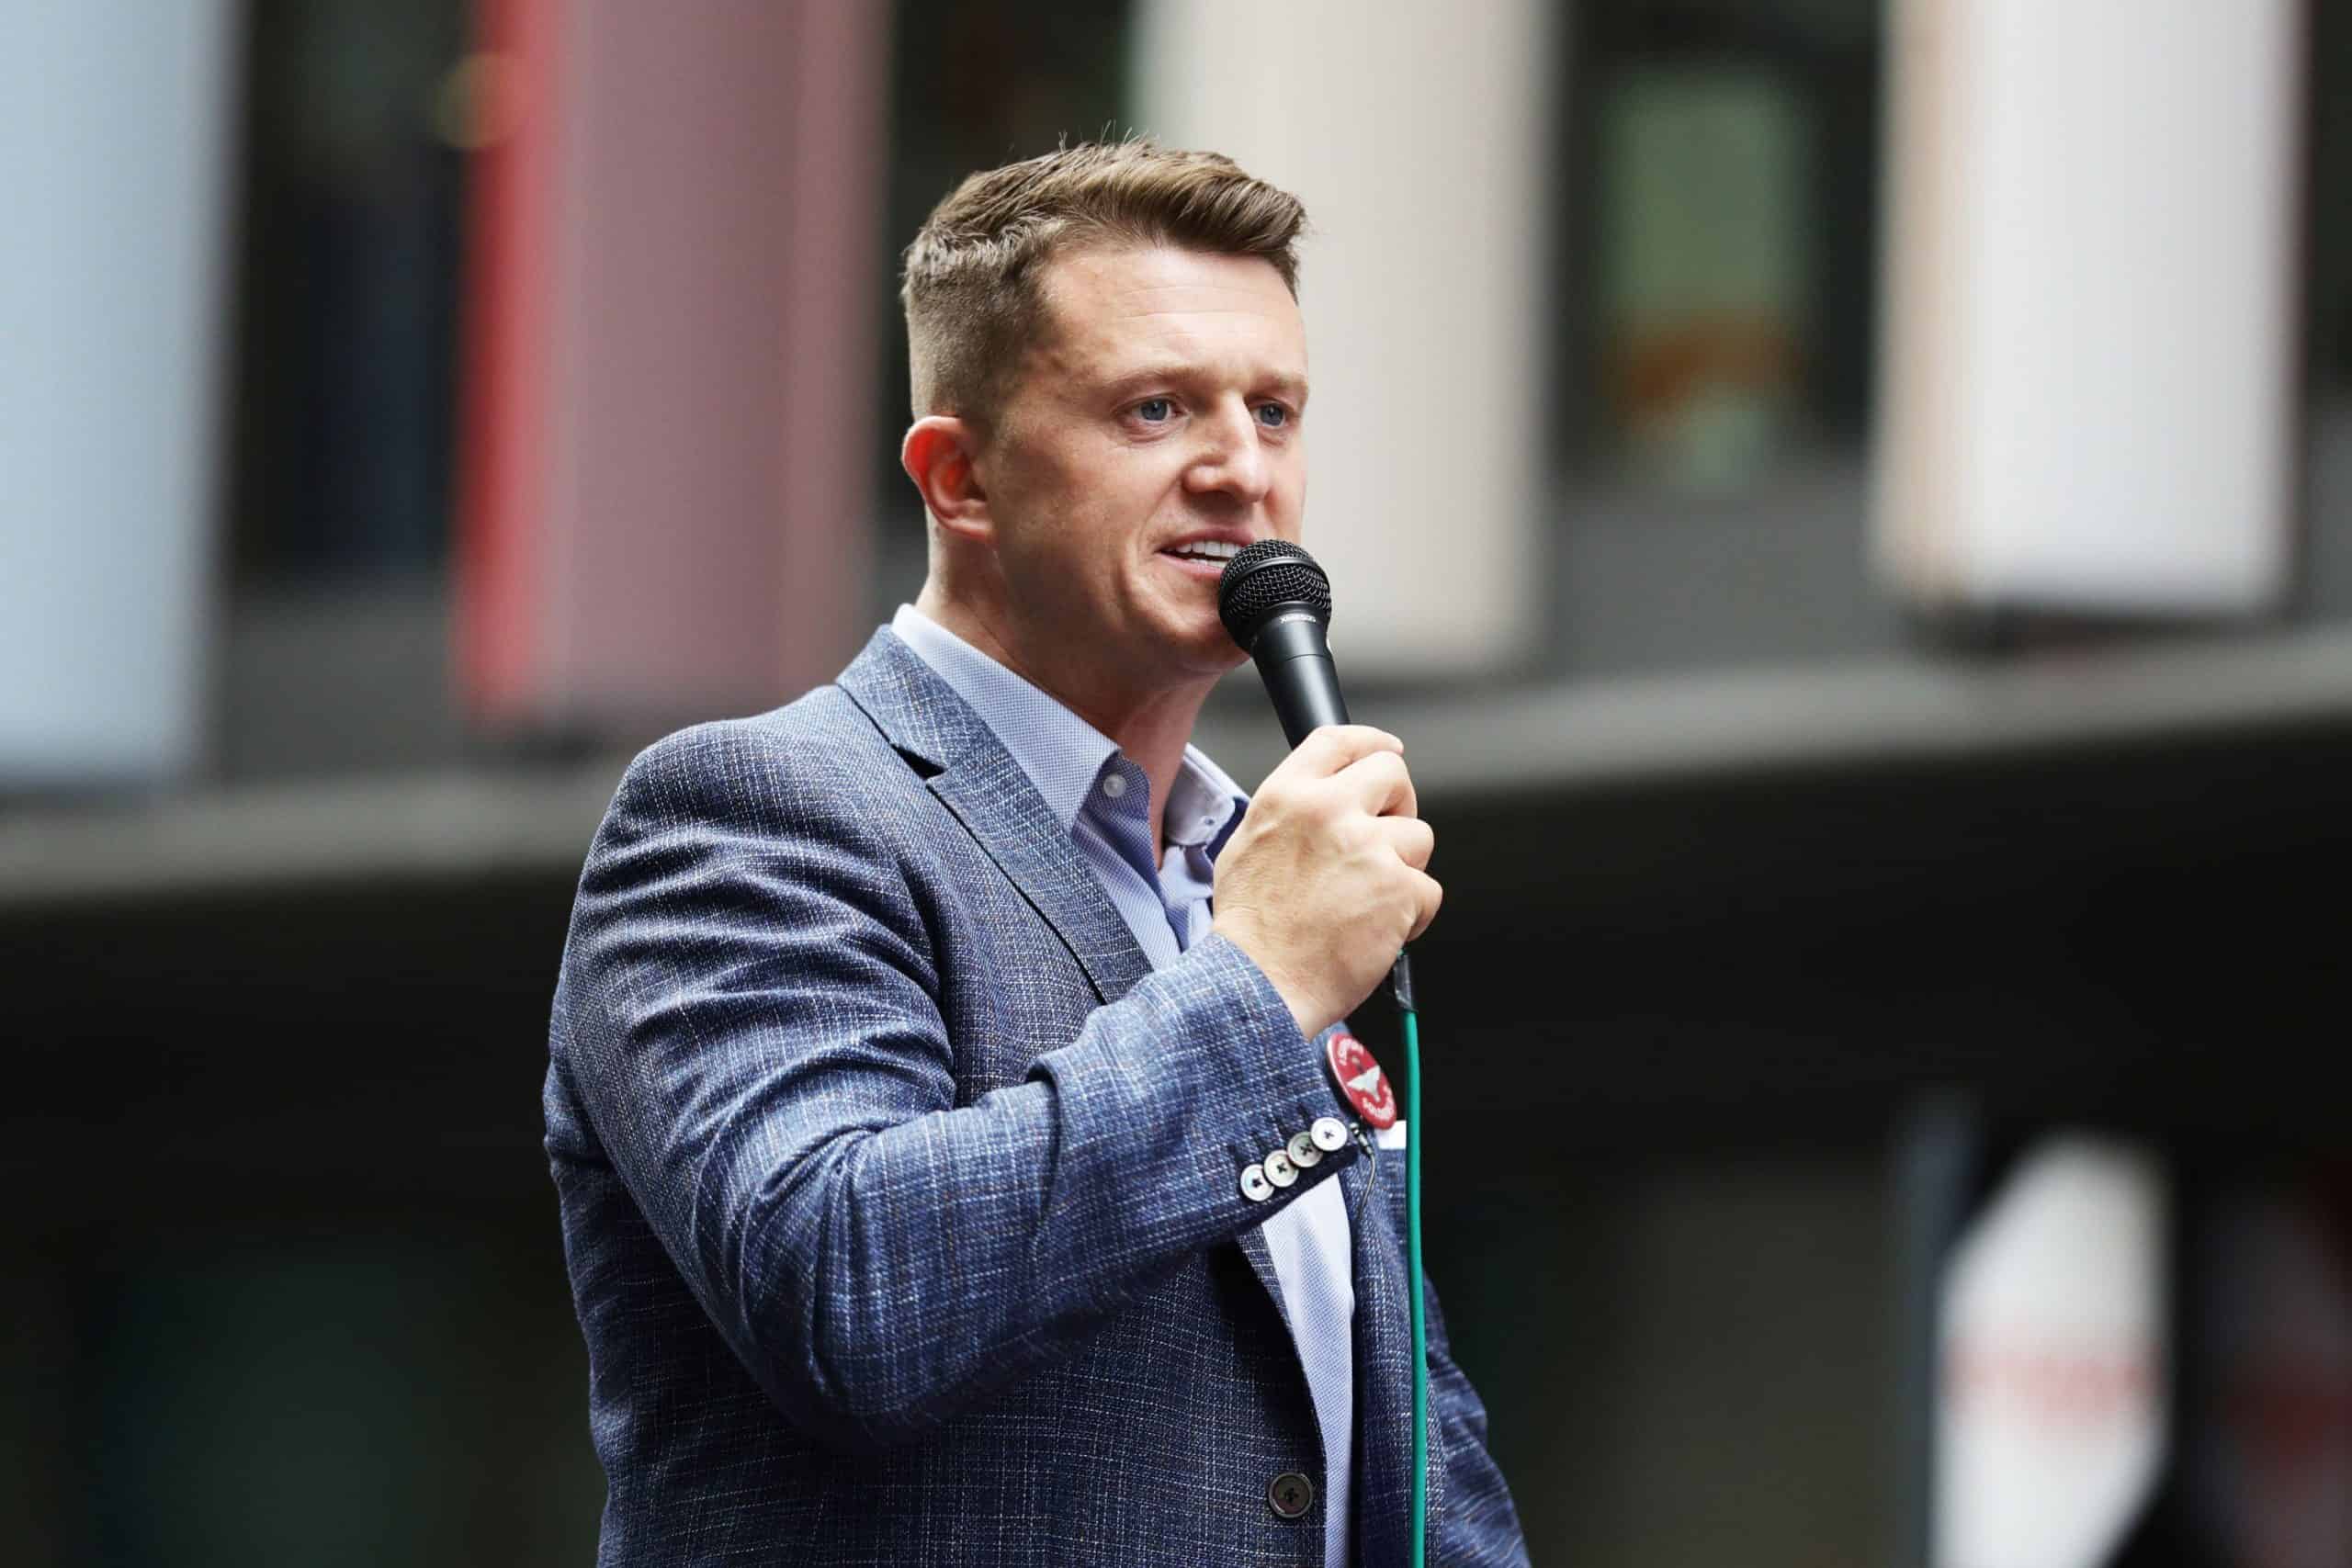 Man cleared of harassing Tommy Robinson after former EDL leader ‘lied’ to police